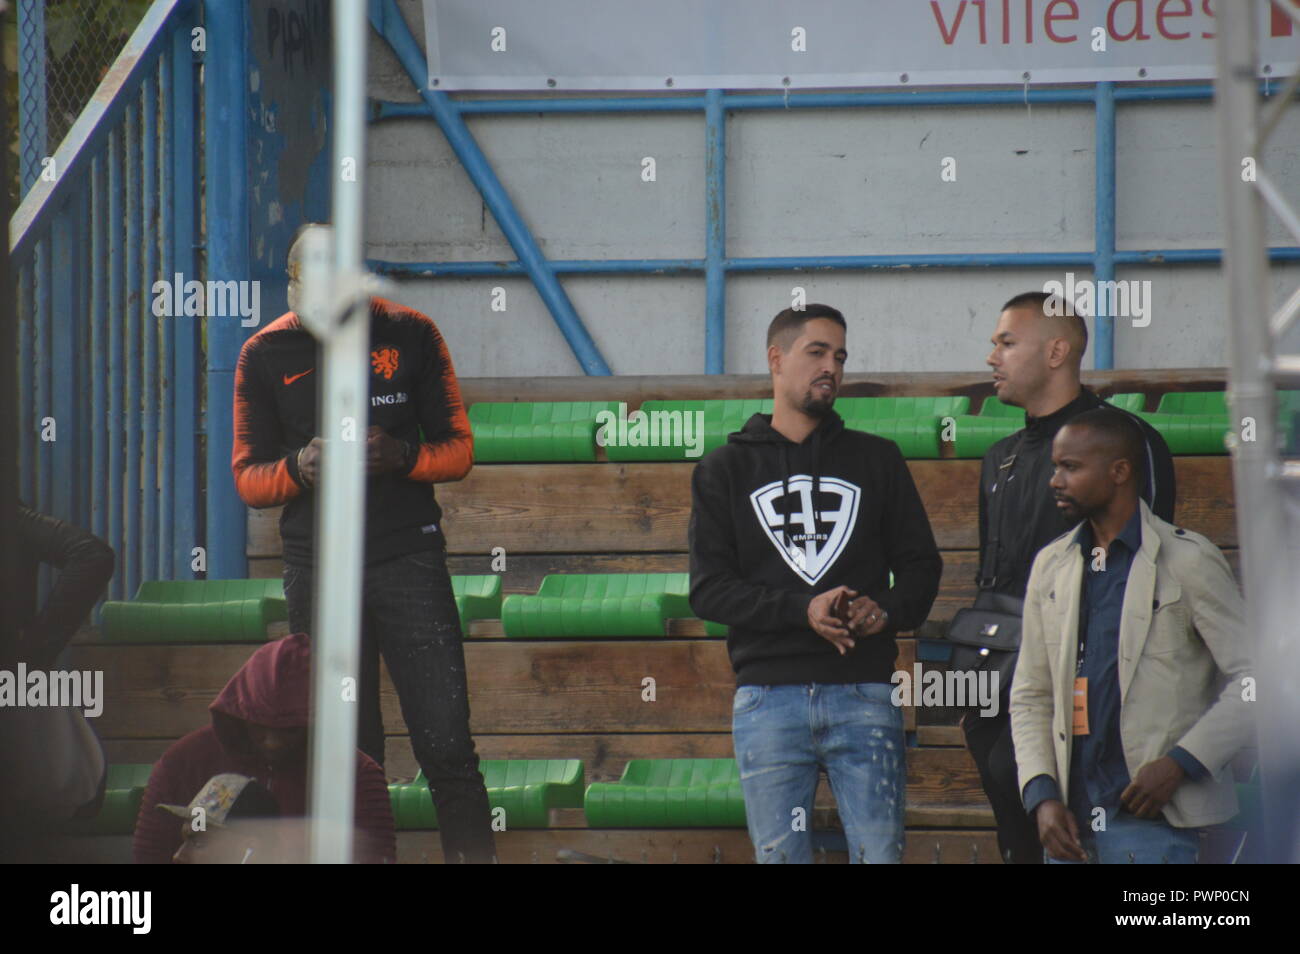 Bondy, France. 17th Oct, 2018. Youssef AKDIM aka LARTISTE (wearing the hoodie).  Kylian Mbappe,  Fifa world cup 2018 soccer champion comes back in his town of Bondy (Paris suburb). Stade Leo Lagrange. Support of his fans and supporters.17 october 2018.14h. Presence  of the french girls band L.E.J, the singer ' LArtiste ', the Mayor of Bondy Sylvine Thomassin.  ALPHACIT NEWIM / Alamy Live News Credit: Alphacit NEWIM/Alamy Live News Stock Photo